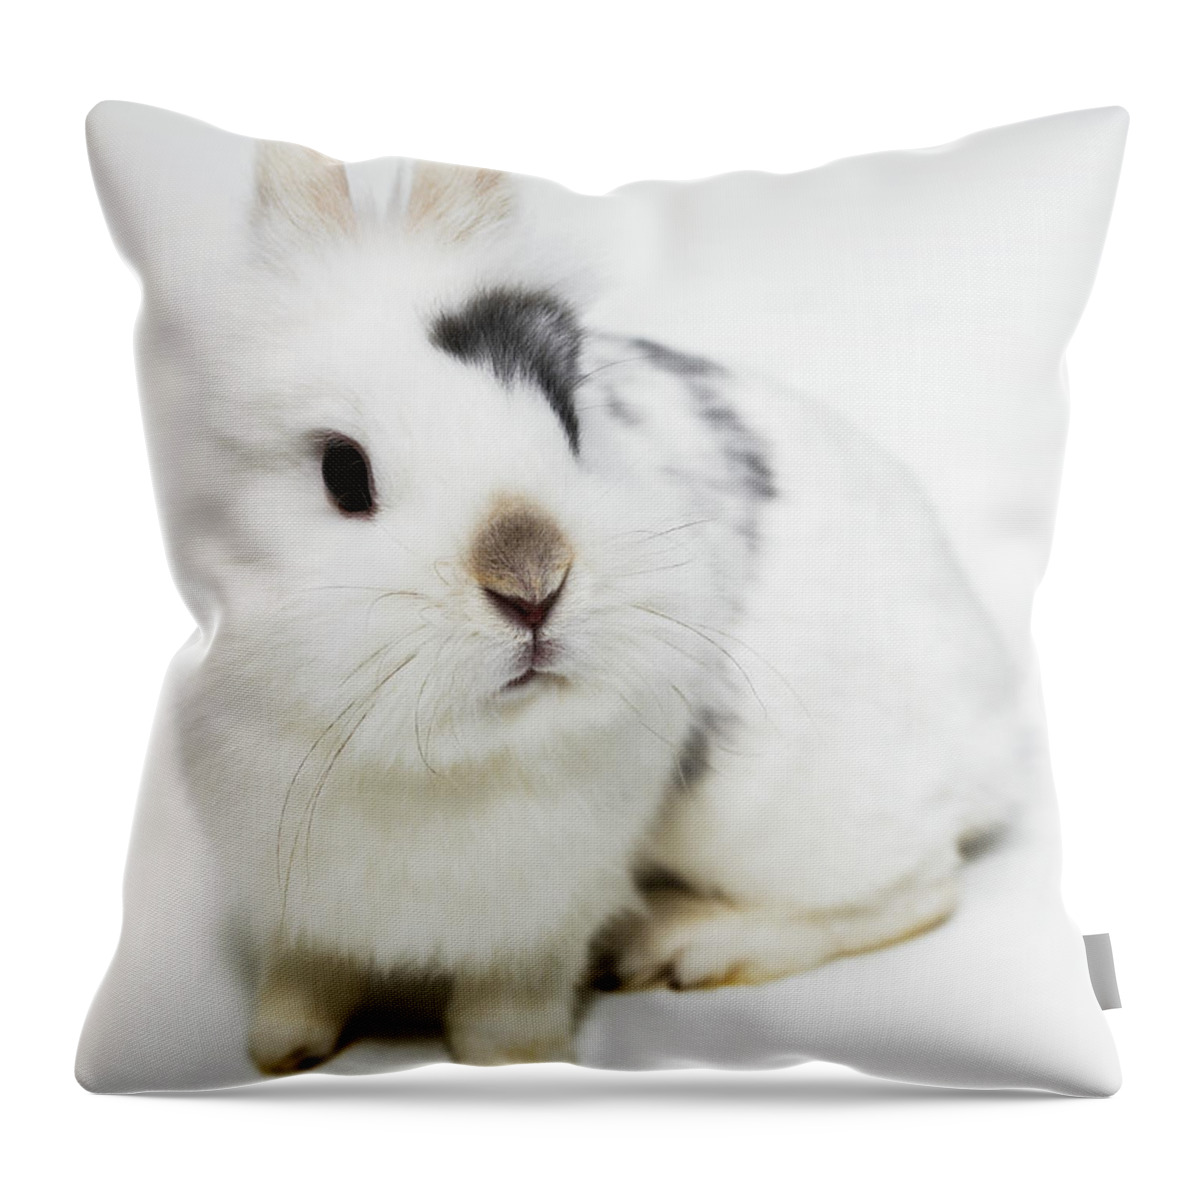 White Background Throw Pillow featuring the photograph White, Black And Brown Rabbit by Michael Blann